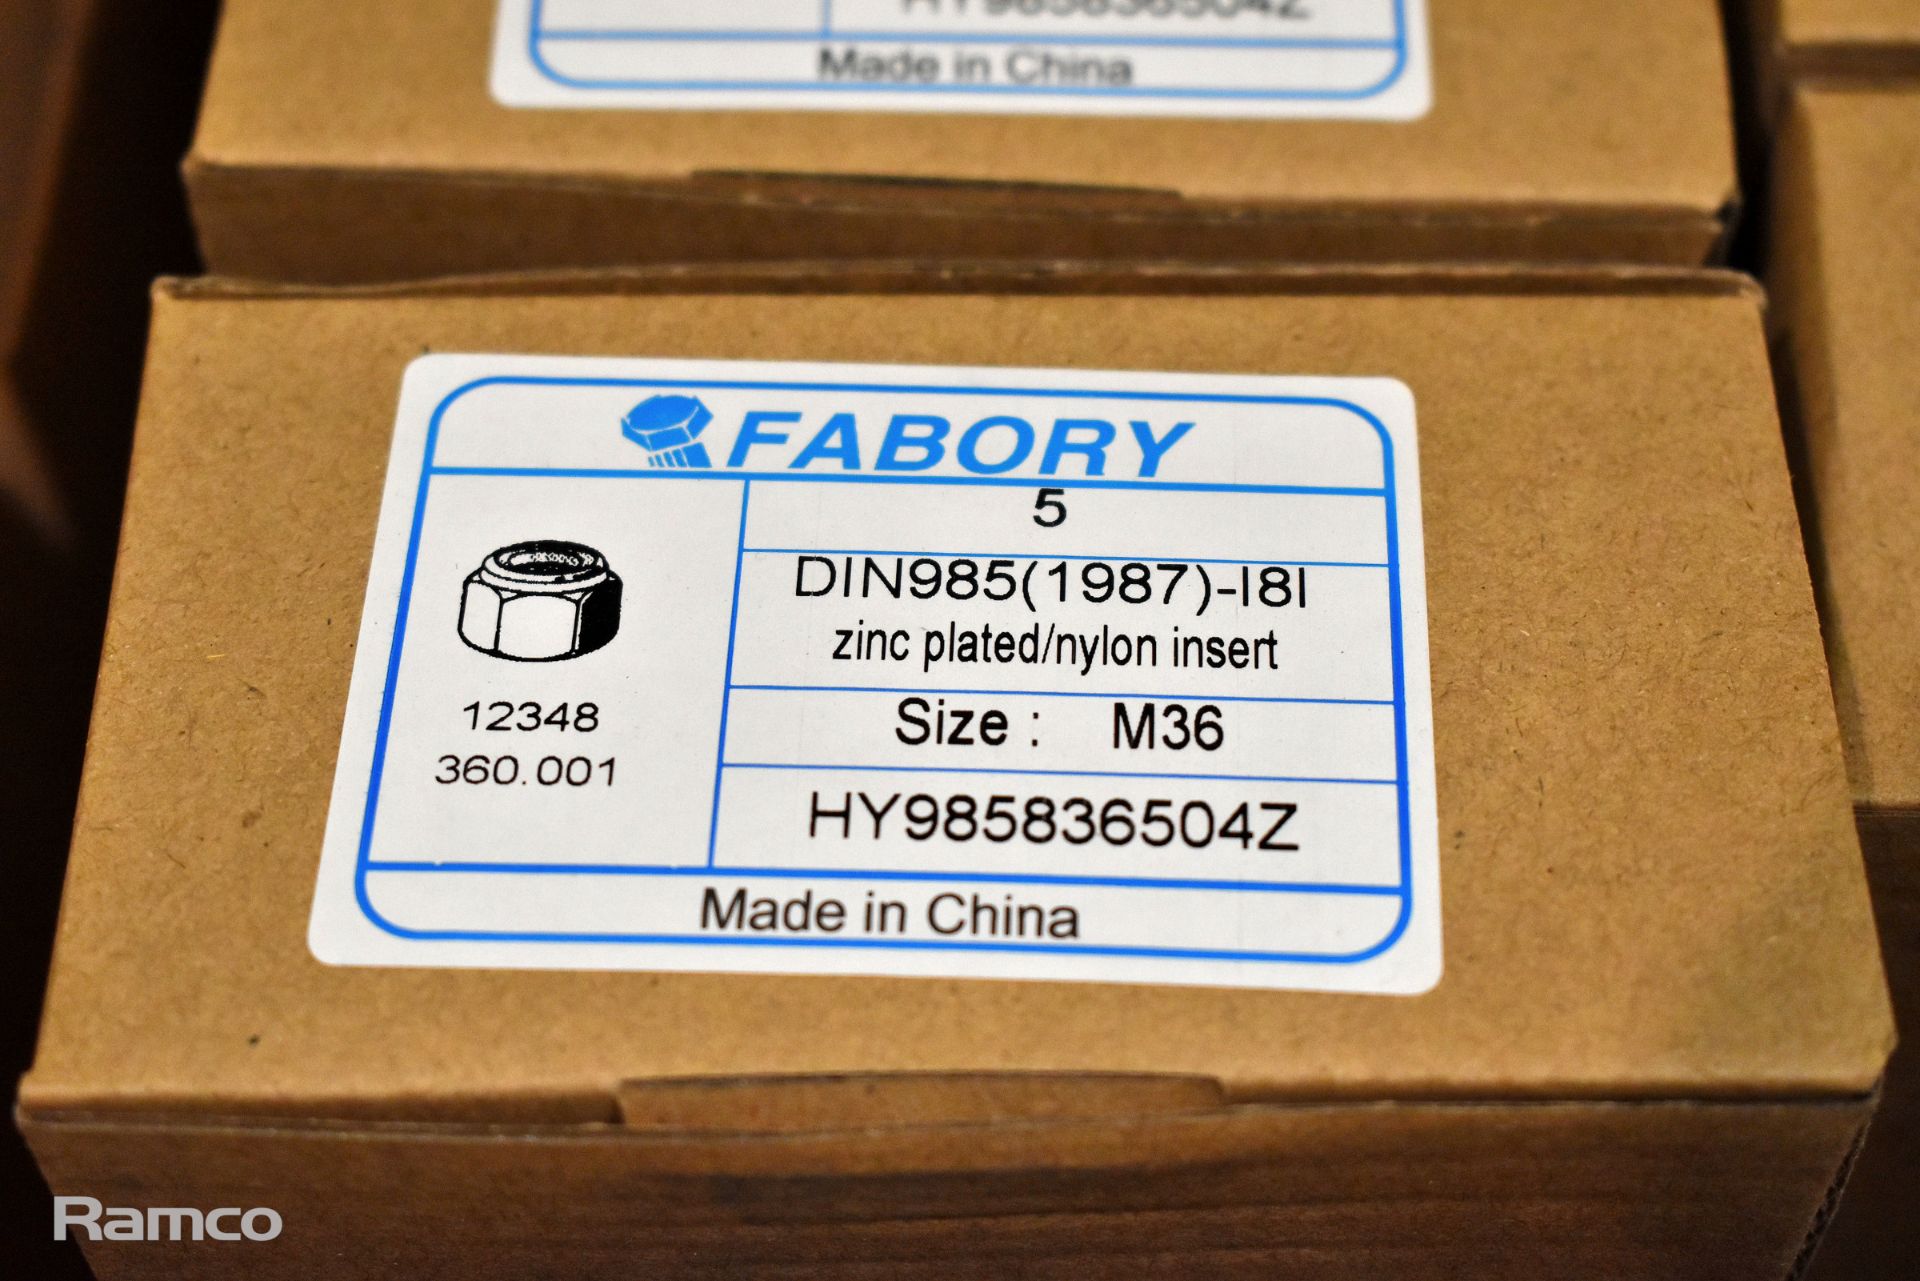 Fabory 36 mm nylon insert locking nuts - 1 box - 6 packs - 5 nuts per pack - Image 2 of 2